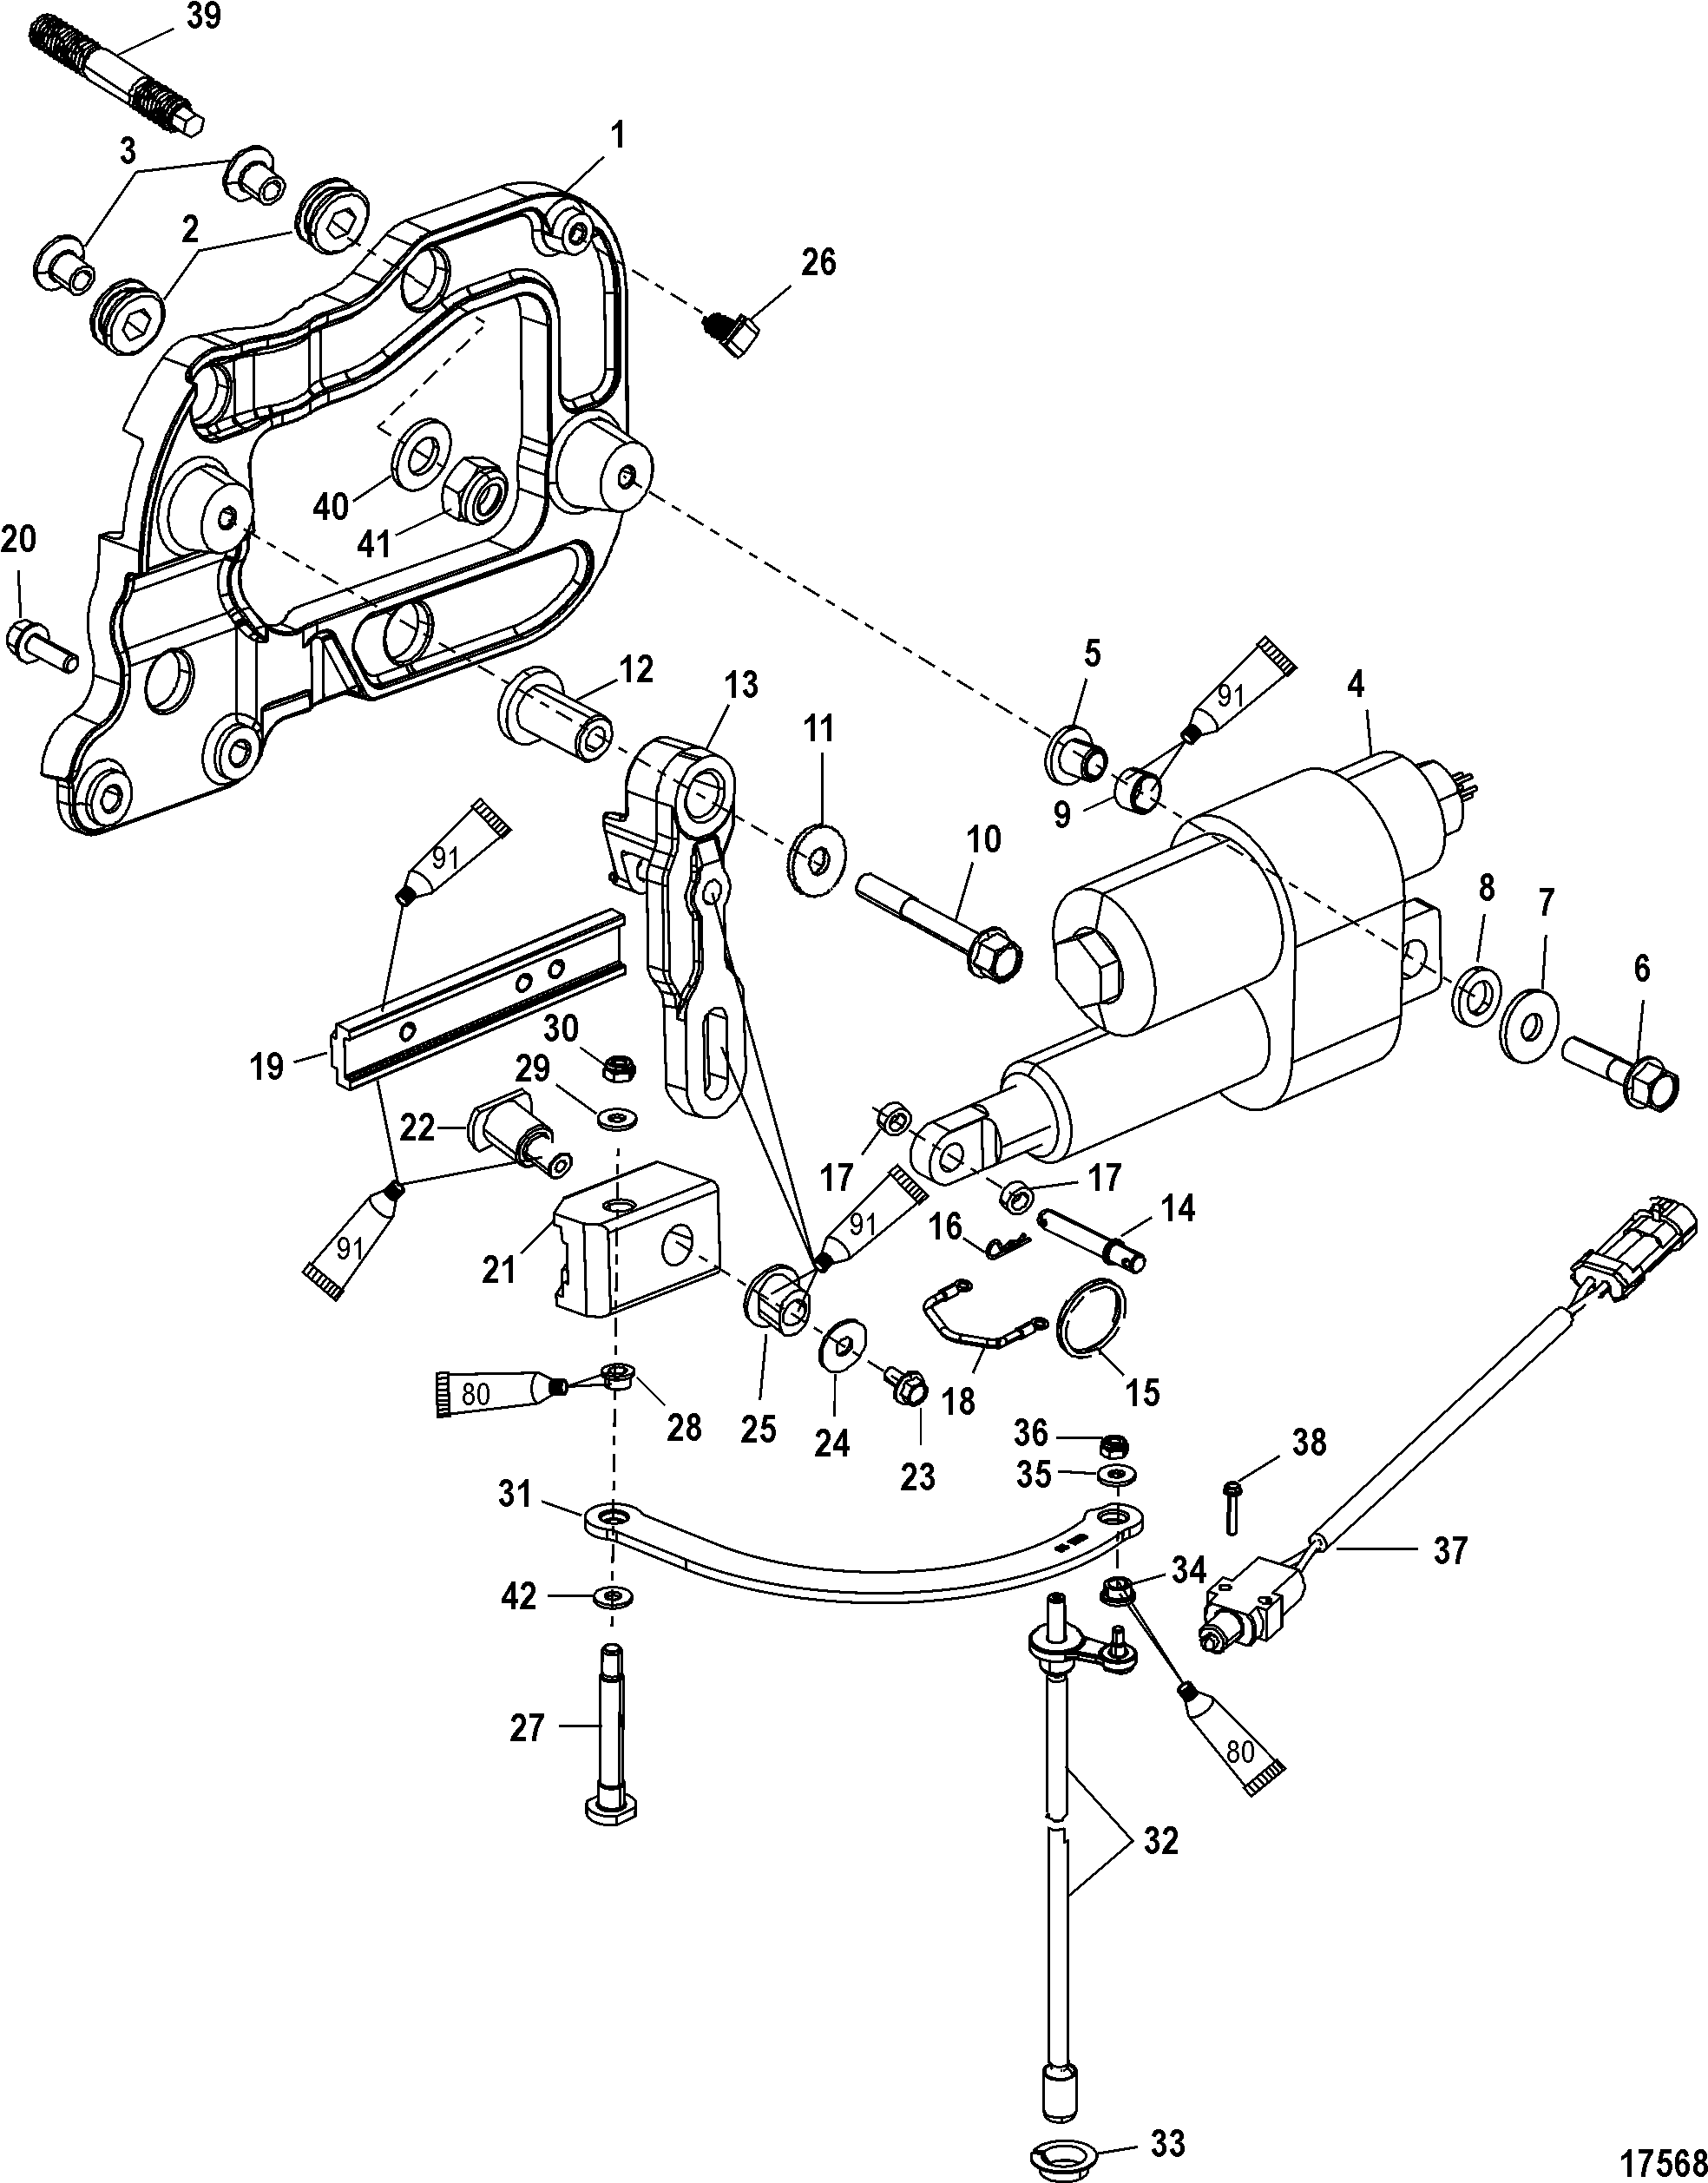 Shift Components(Serial Number 1B290523 and Up)